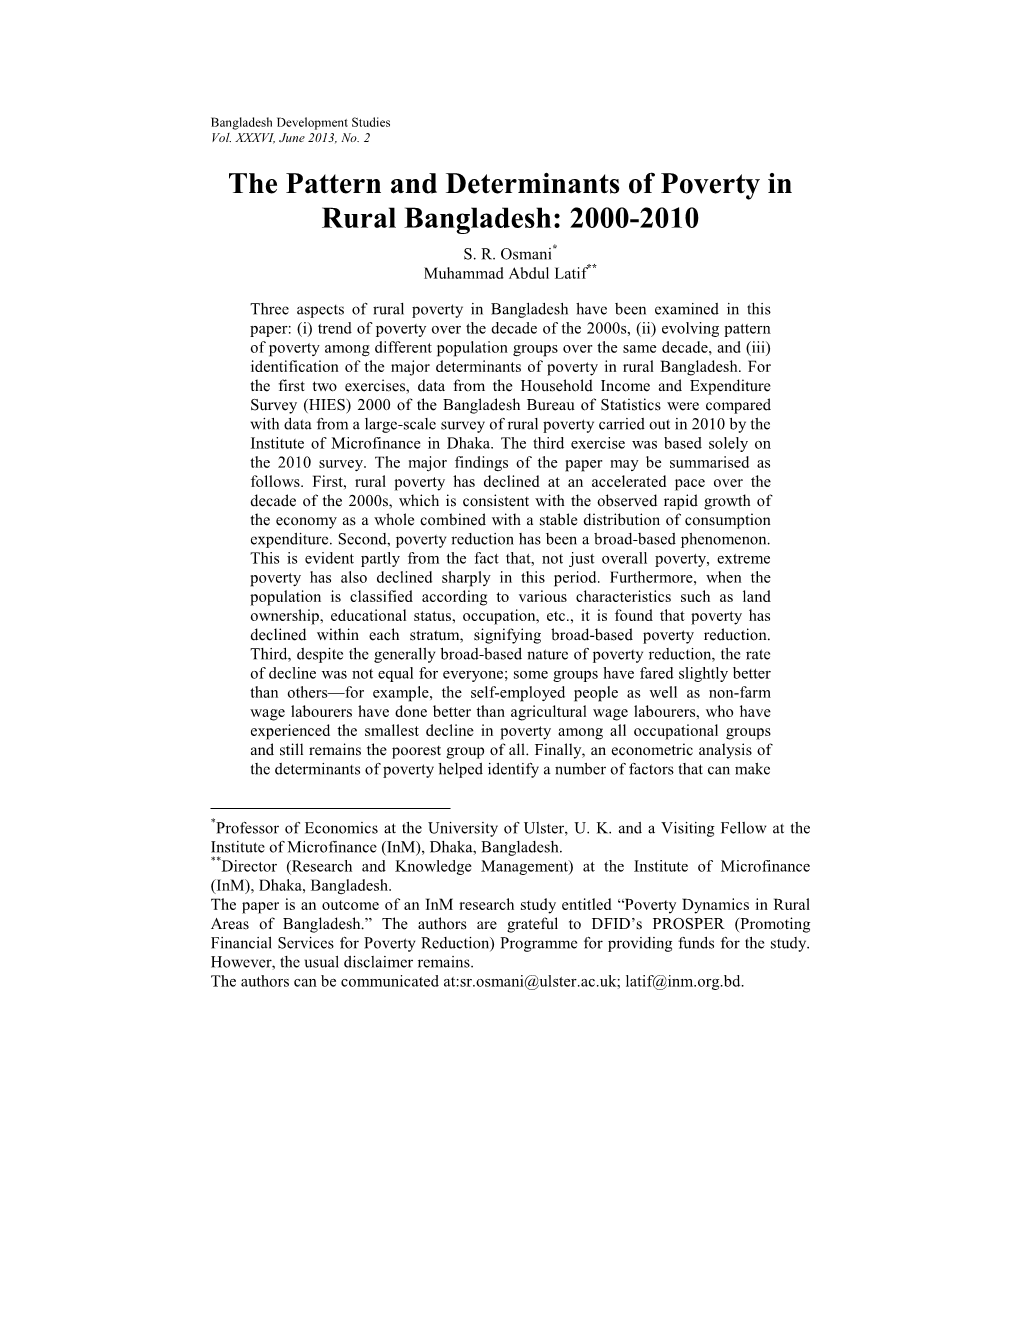 The Pattern and Determinants of Poverty in Rural Bangladesh: 2000-2010 S